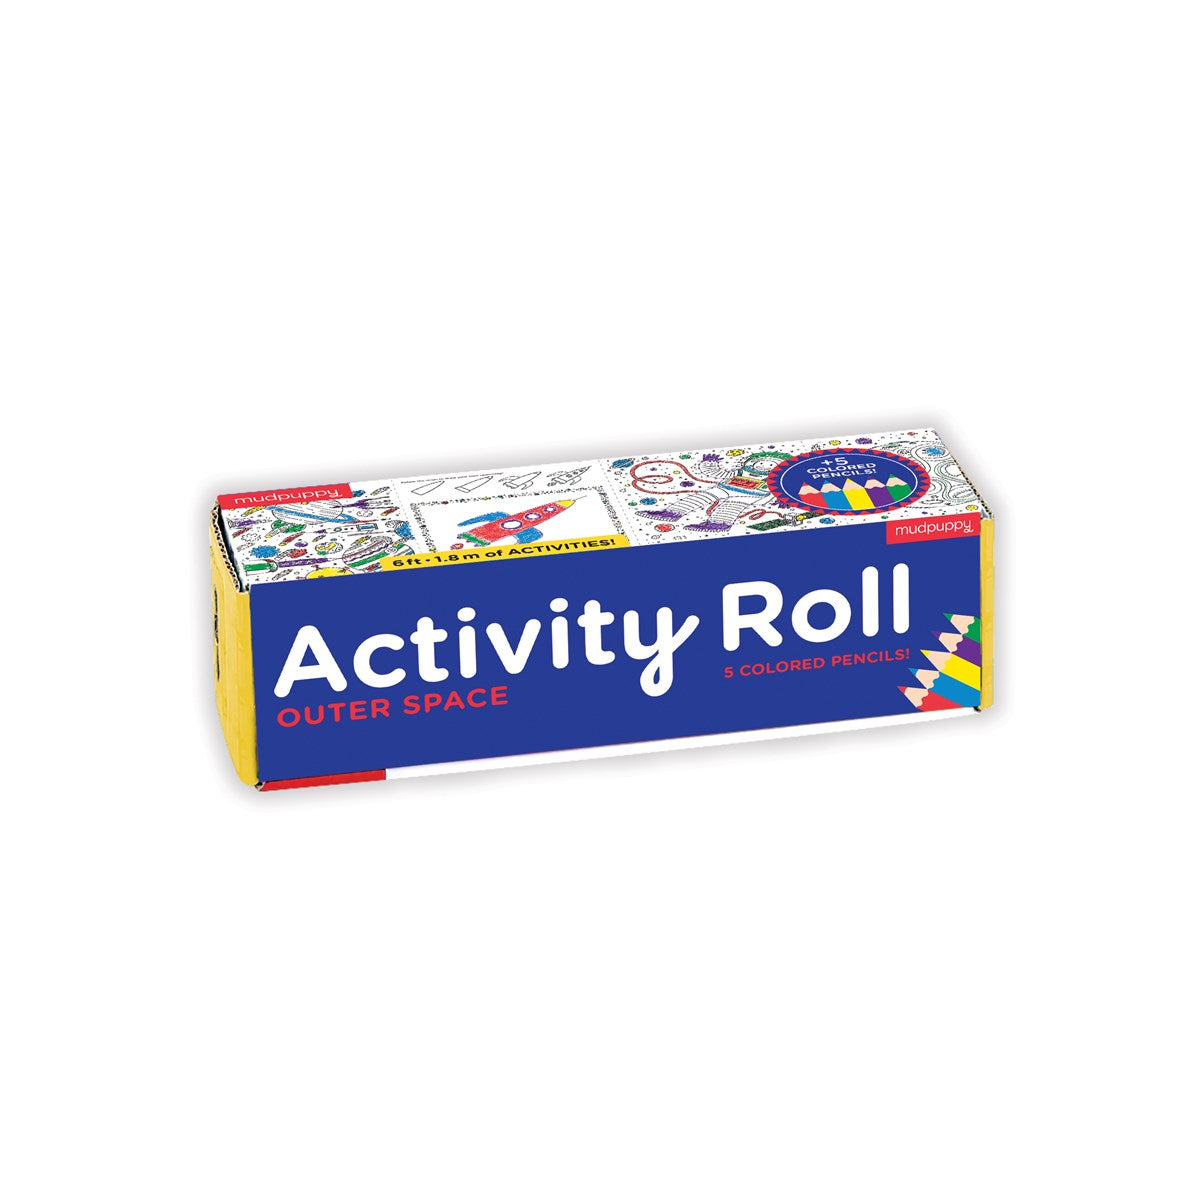 Roll Activity Outer Space